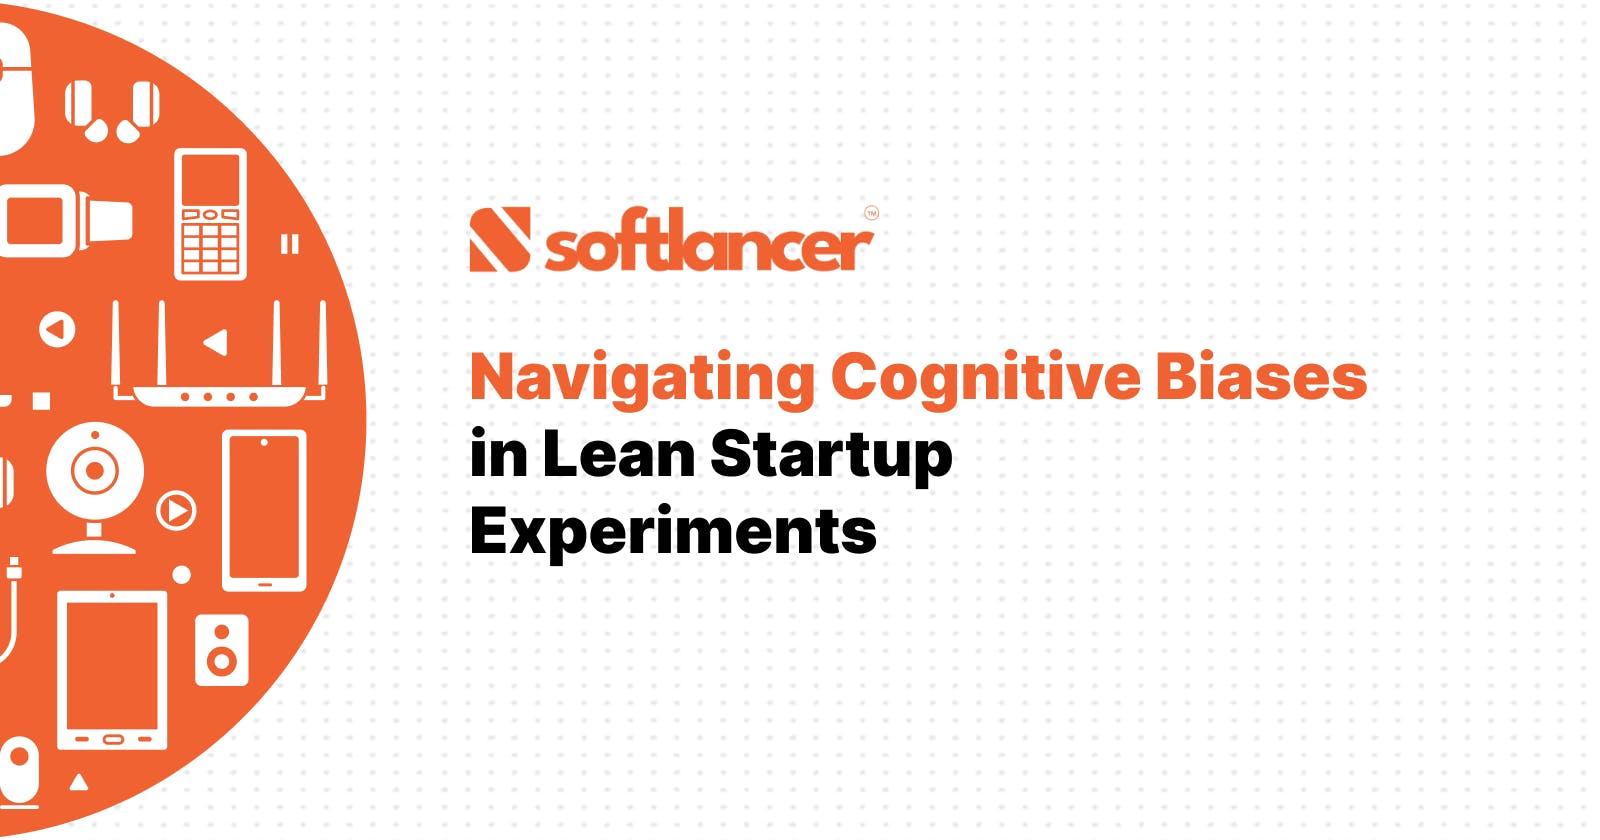 Navigating Cognitive Biases in Lean Startup Experiments